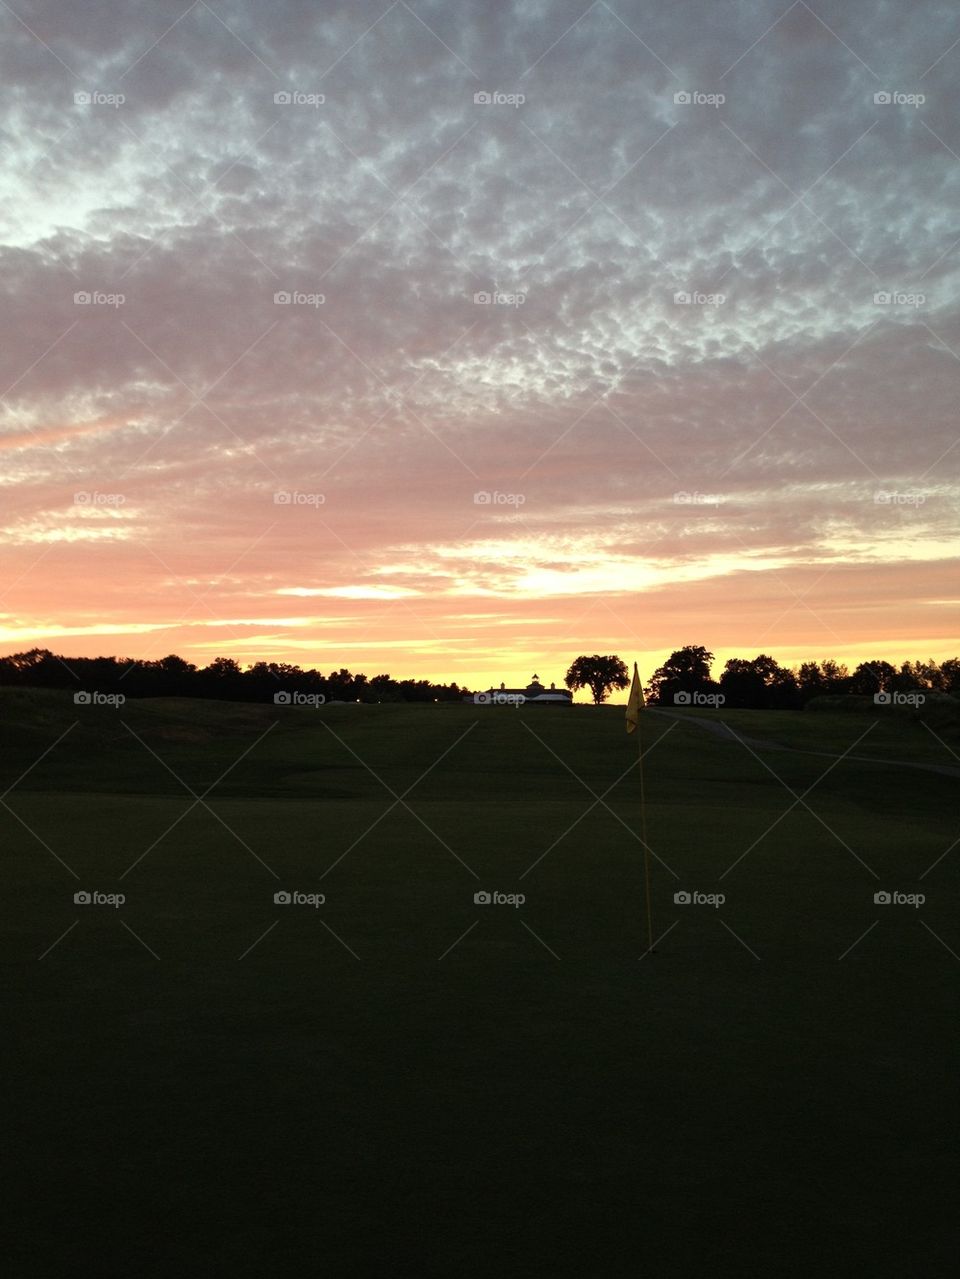 Golf Course sunset with clubhouse 